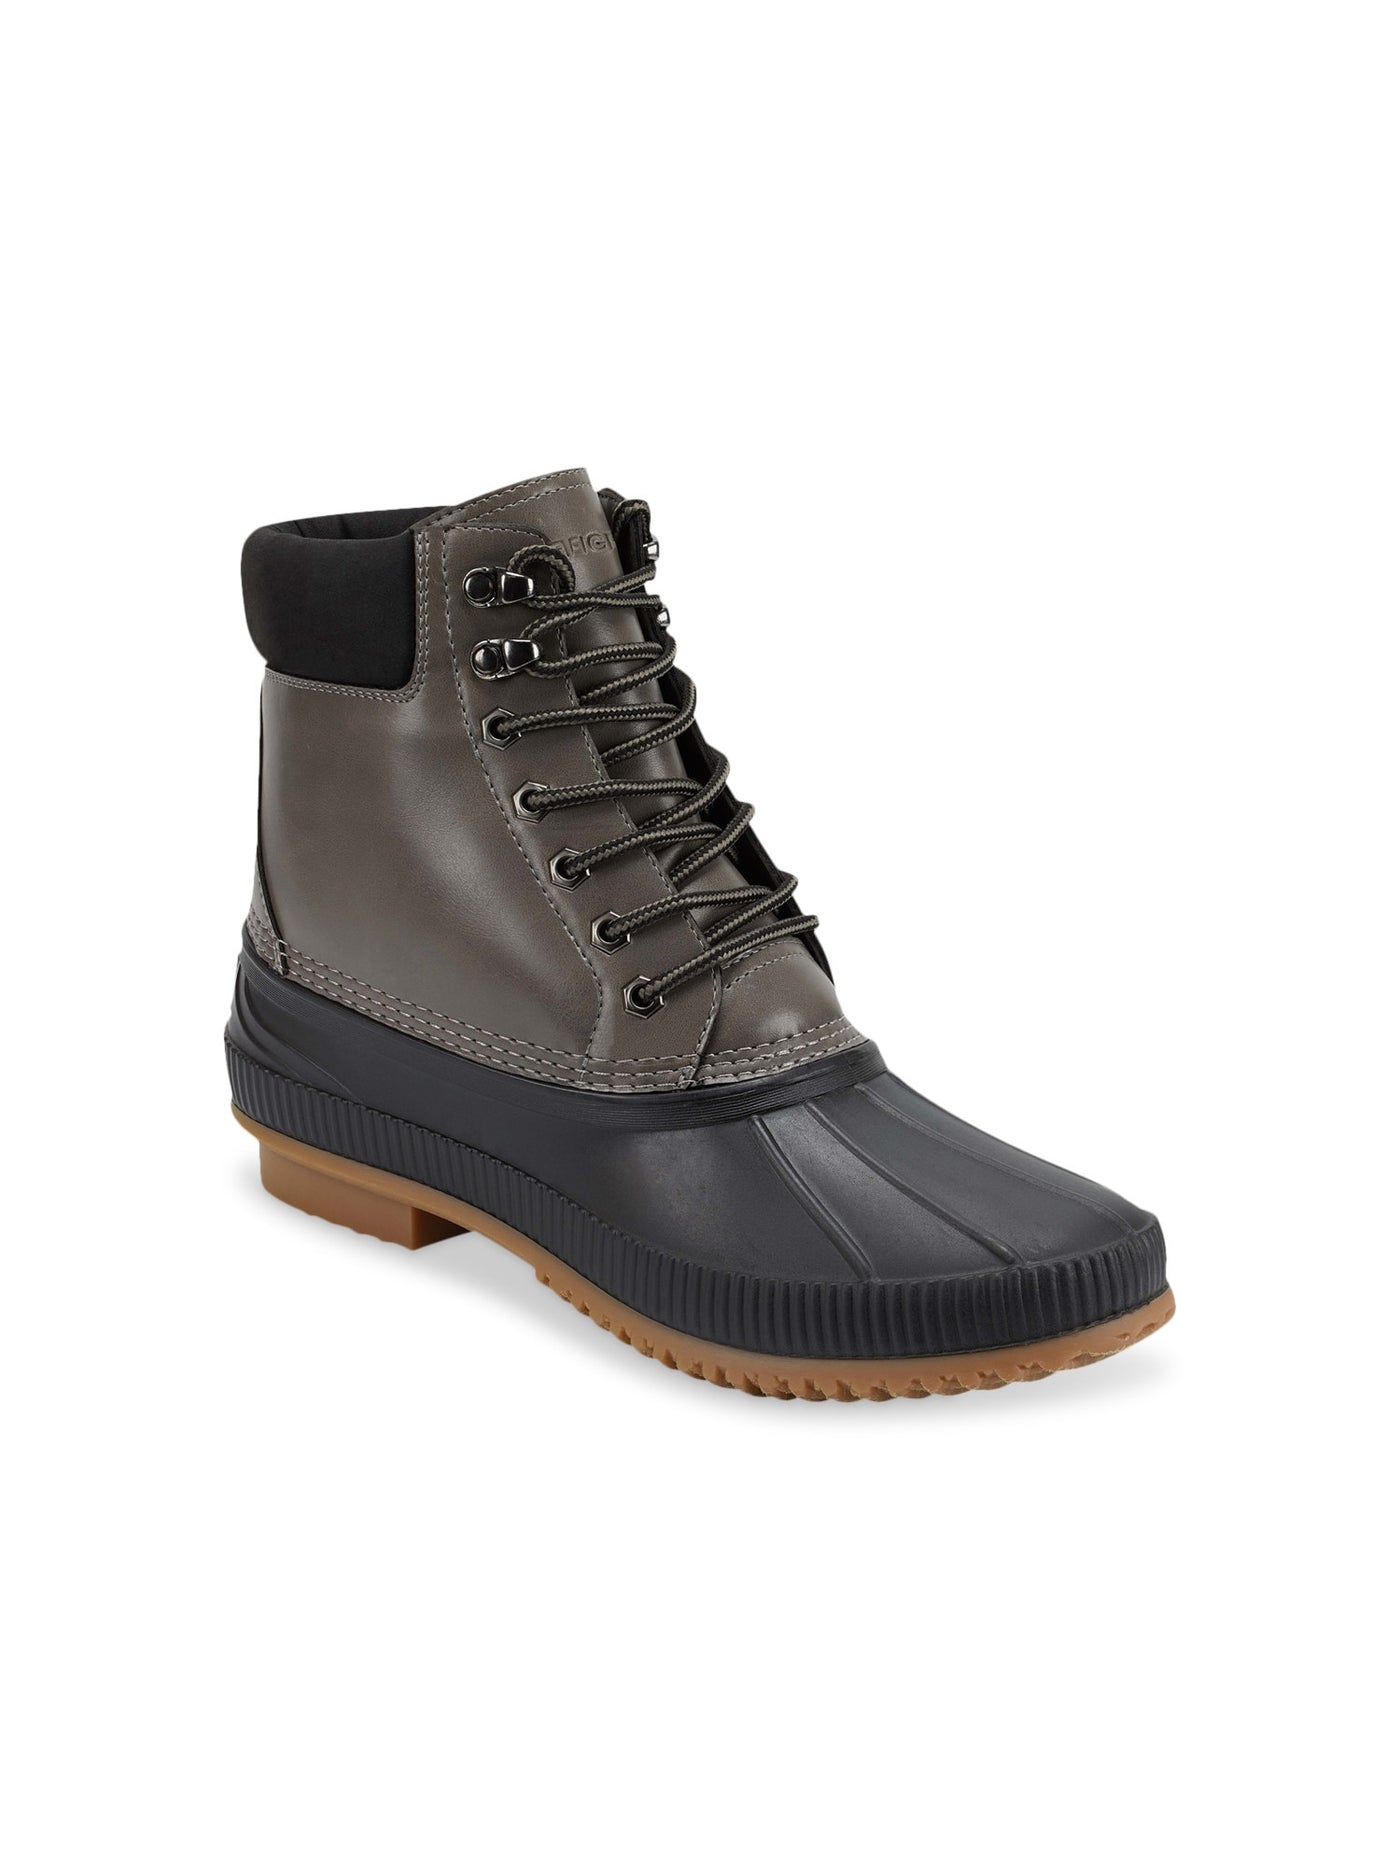 TOMMY HILFIGER Mens Gray Color Block Cushioned Collar Waterproof Padded Colins 2 Round Toe Lace-Up Duck Boots 9